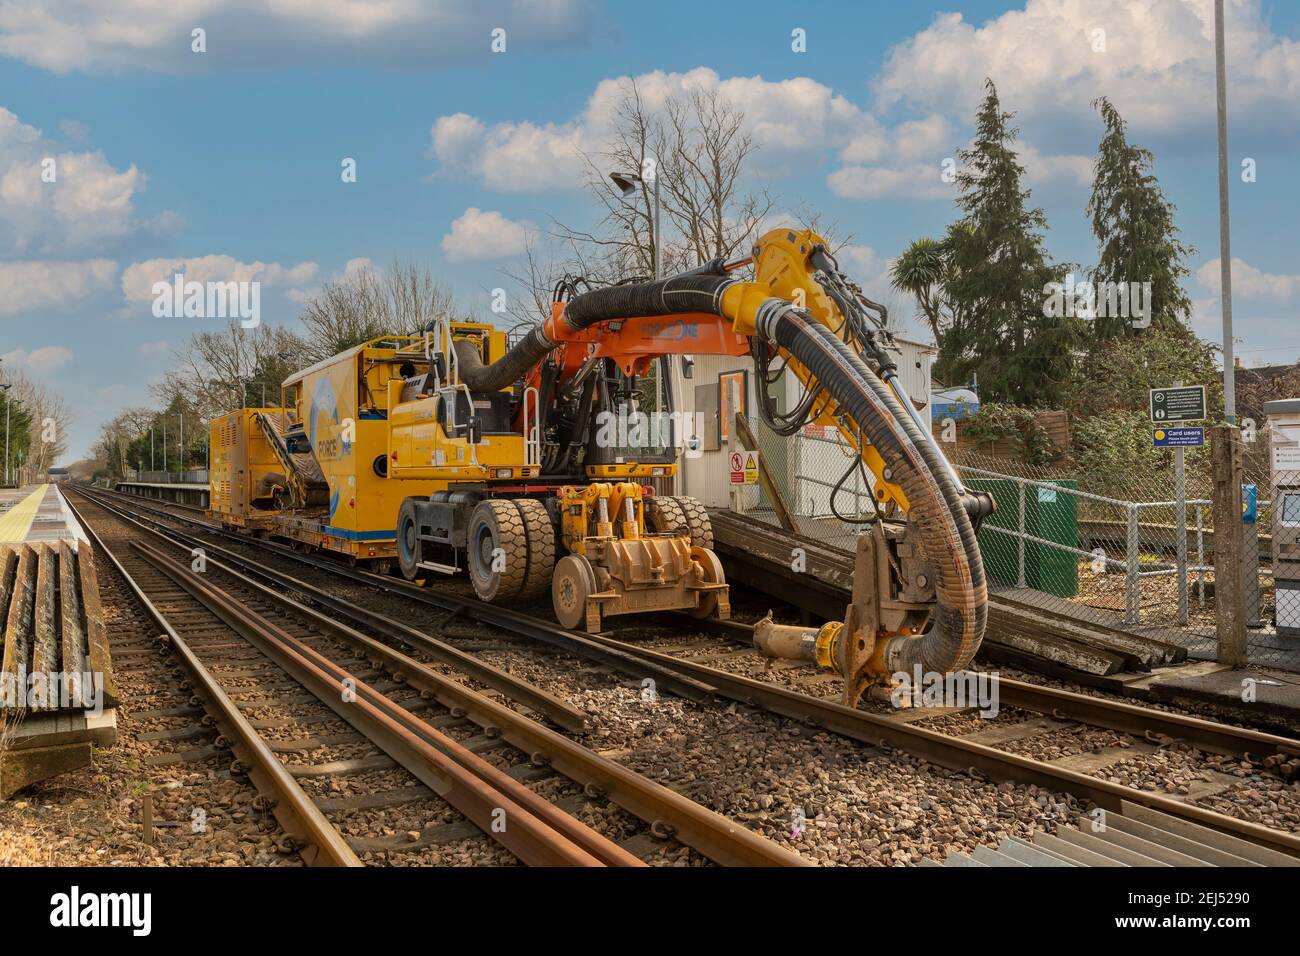 Gigantic Vacuum cleaner at Warblington Station near Havant. Force One suction excavator working on tracks. Stock Photo